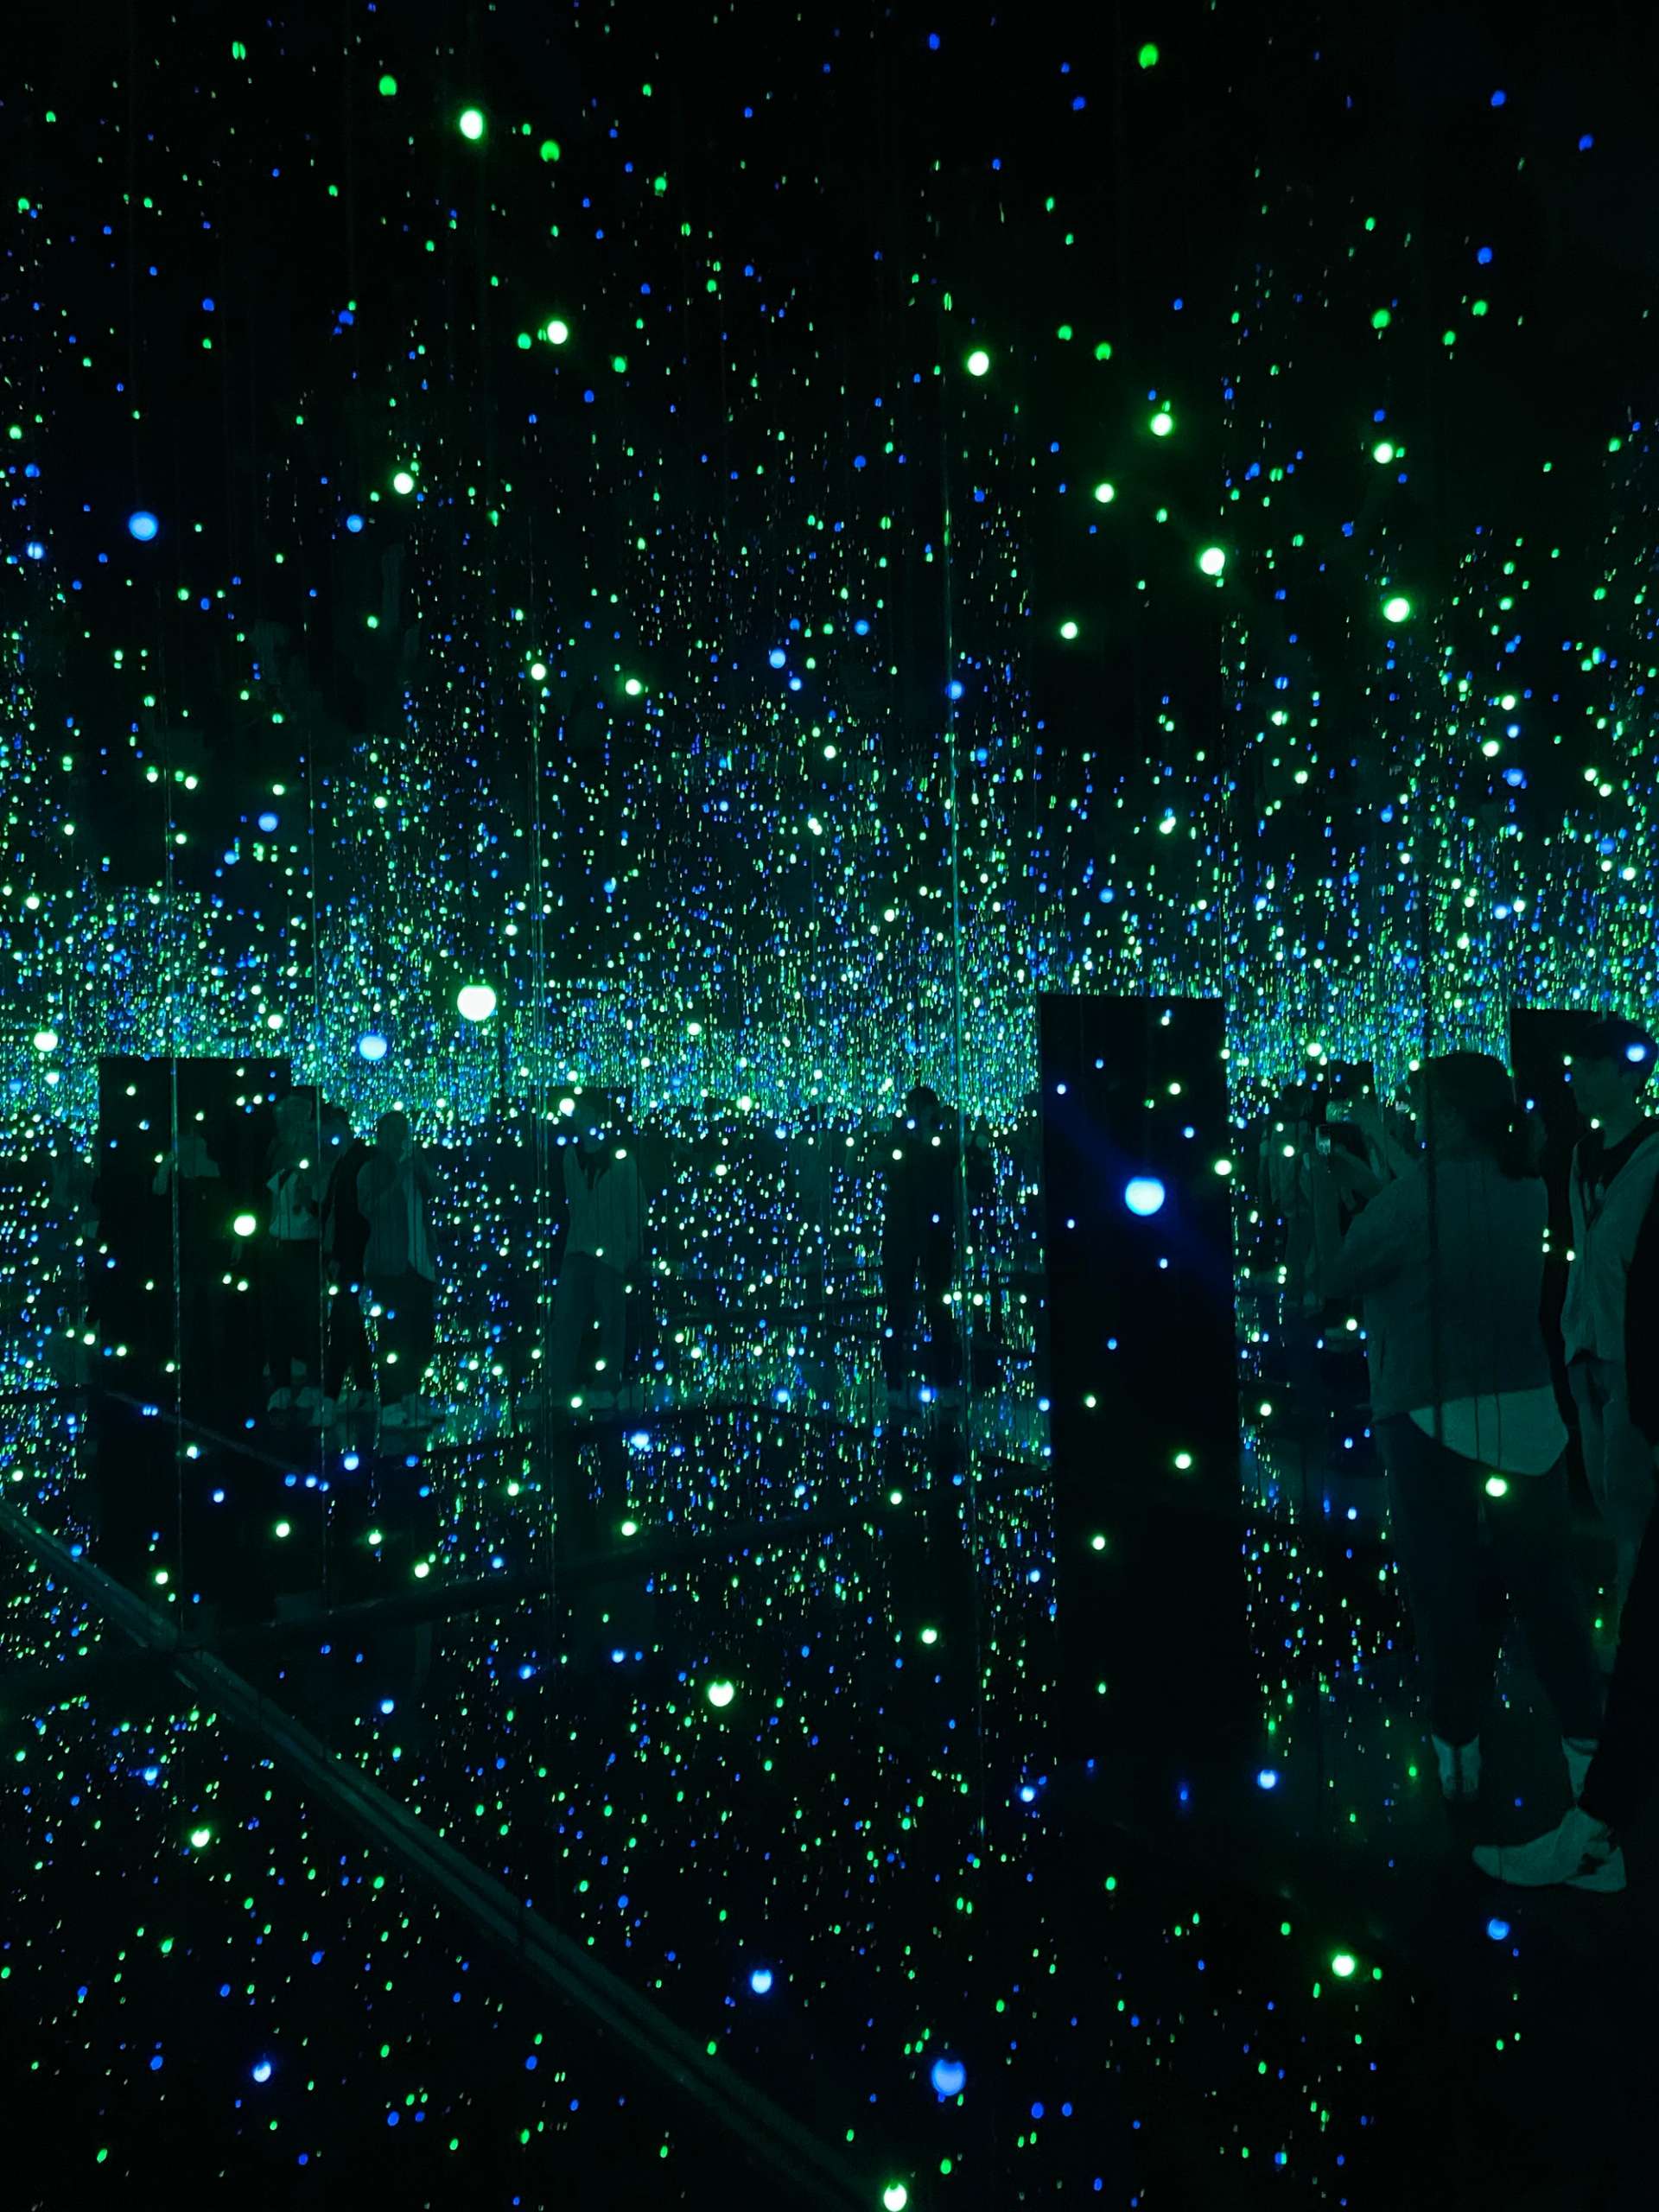 This photograph shows one of Yayoi Kusama's Infinity Rooms at the Tate Modern 2023, a mirrored environment with thousands of bright coloured lights.